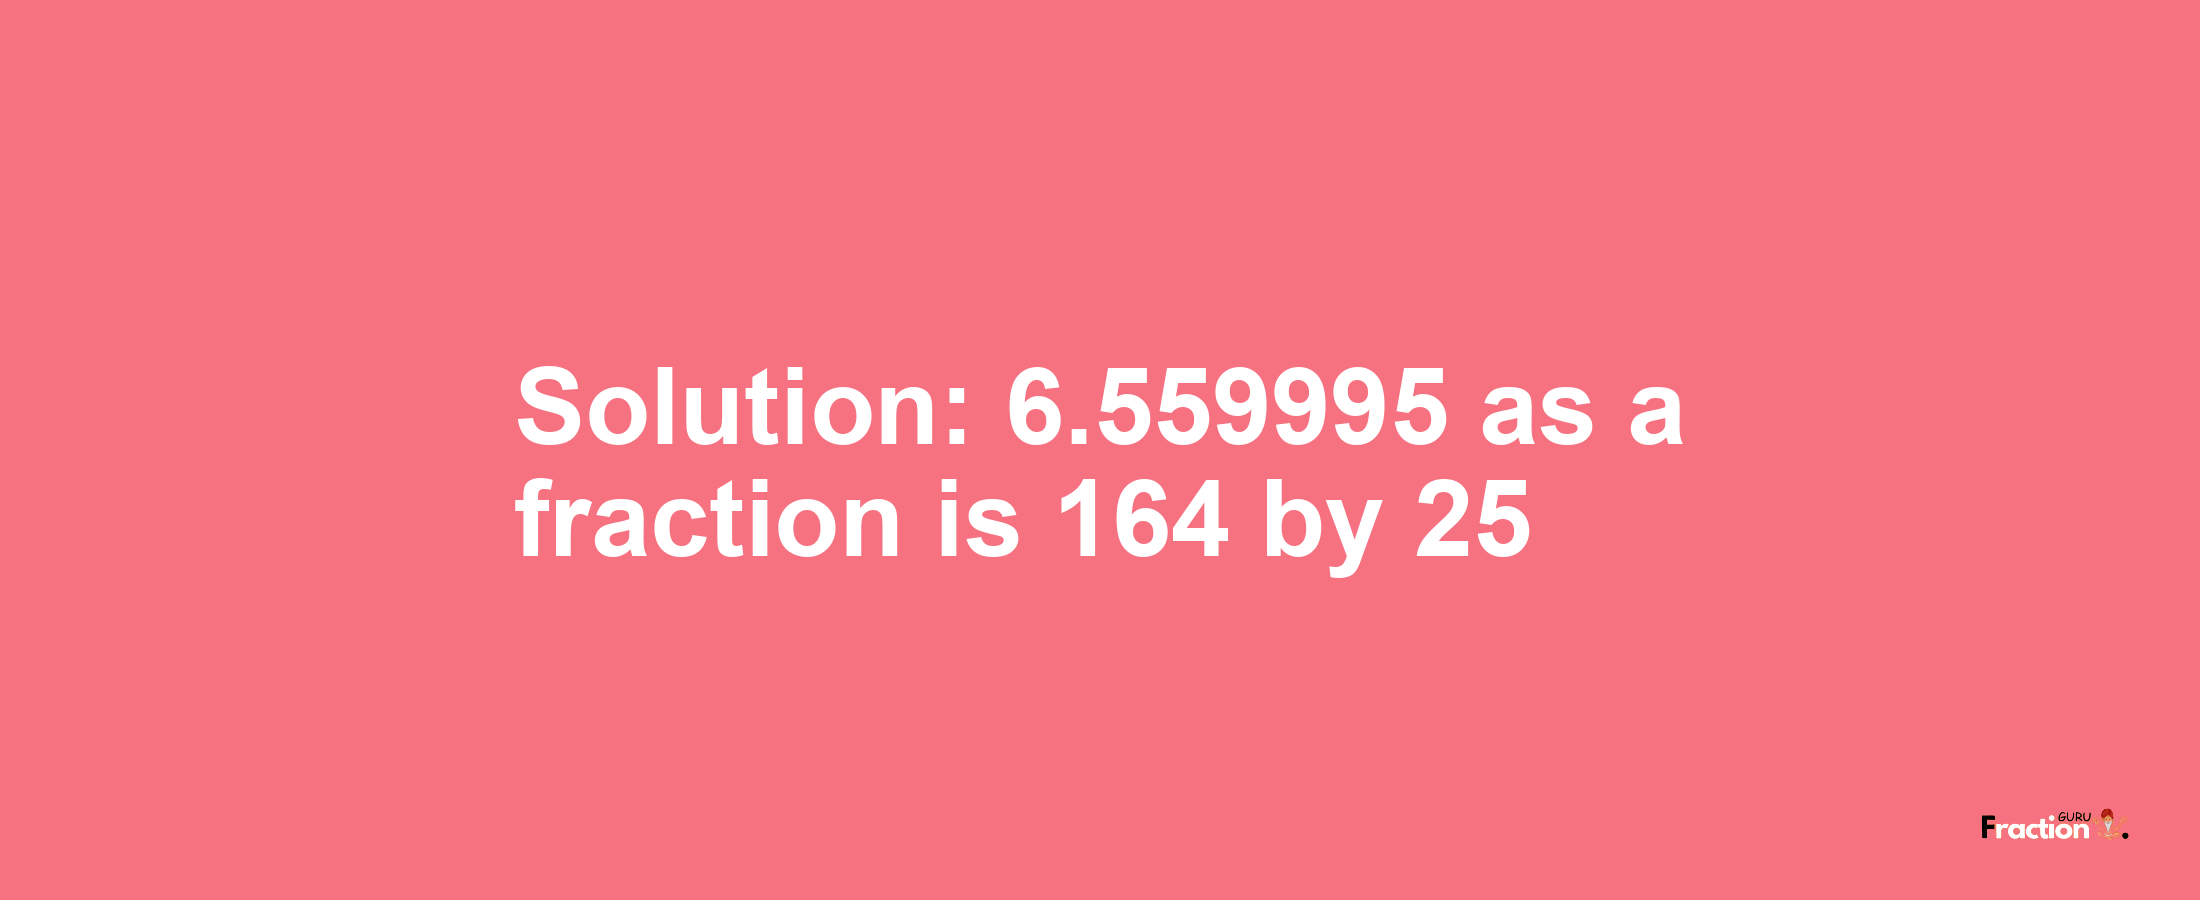 Solution:6.559995 as a fraction is 164/25